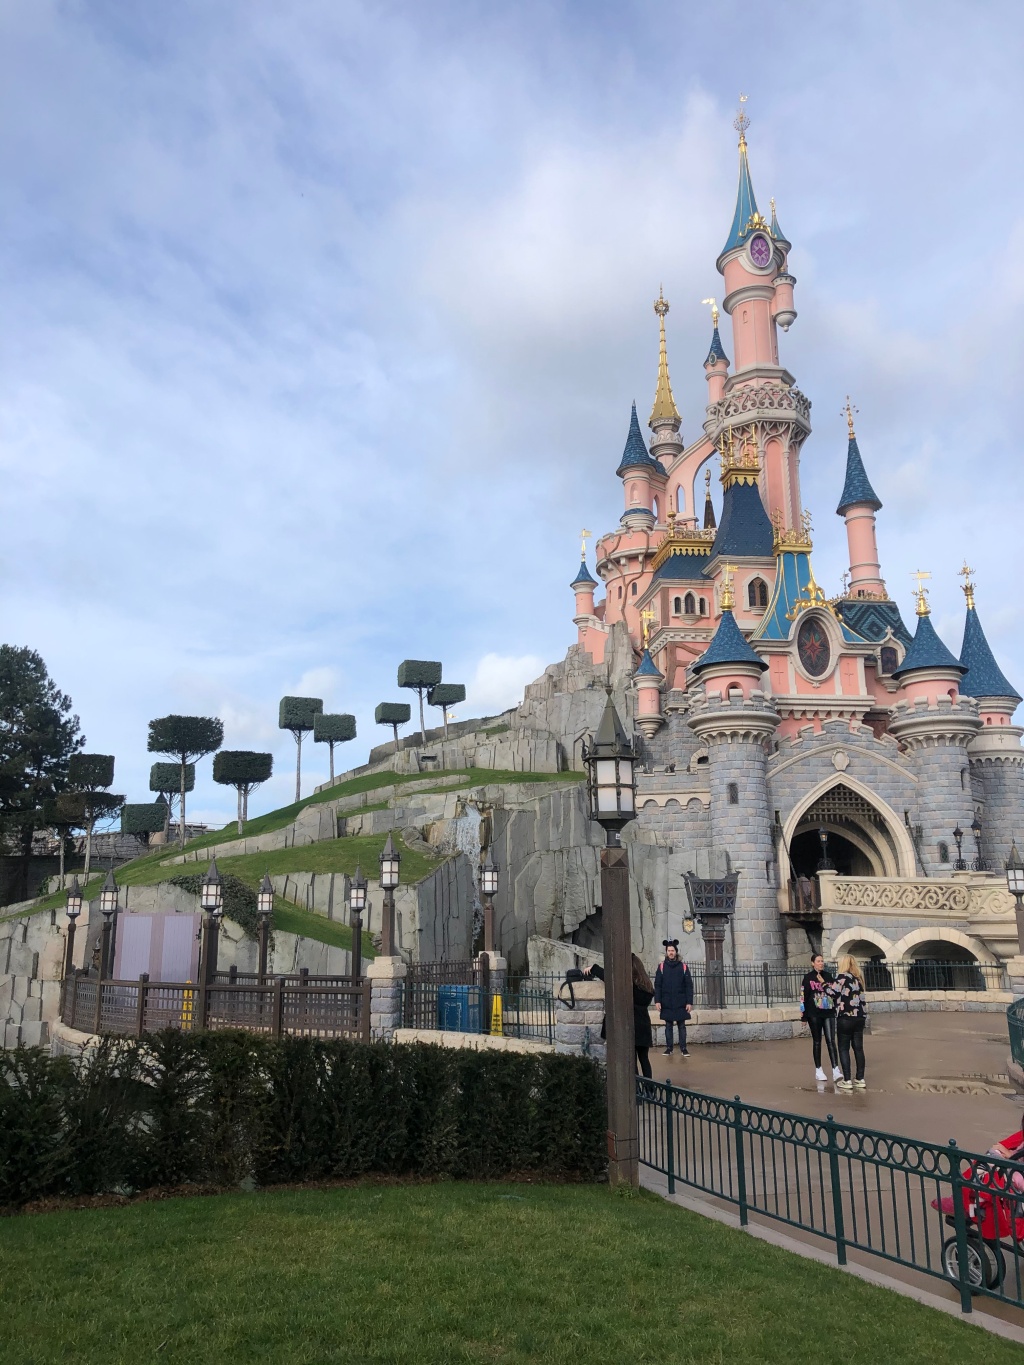 What You Really Need to Know Before You Visit Disneyland Paris